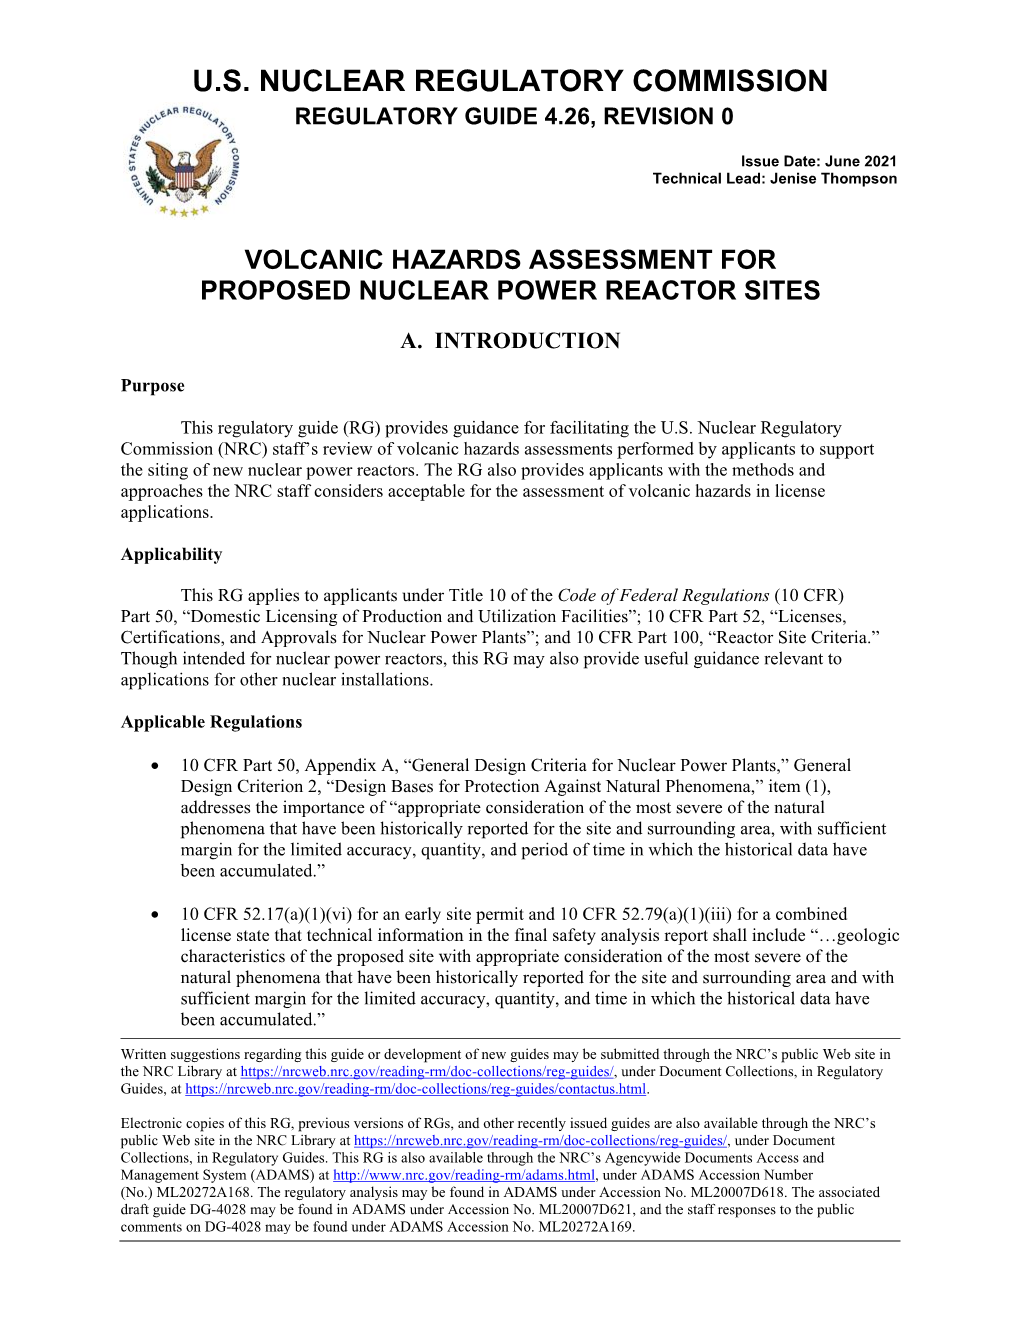 (RG) 4.26, Rev 0, Volcanic Hazards Assessment for Proposed Nuclear